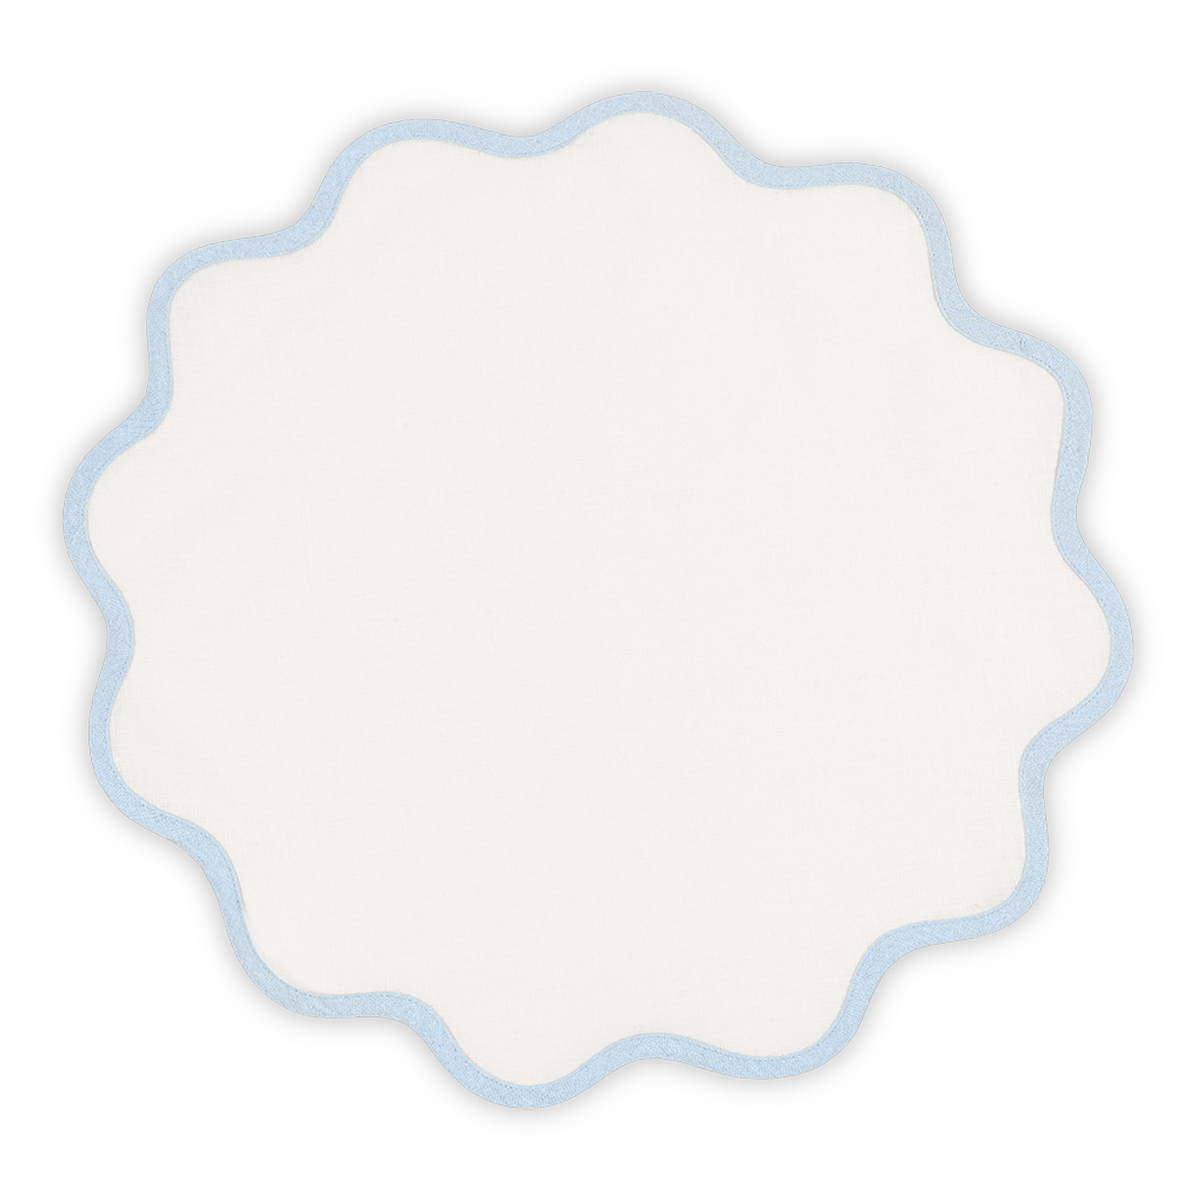 Silo Image of Matouk Scallop Edge Circle Placemat in Color Ice Blue